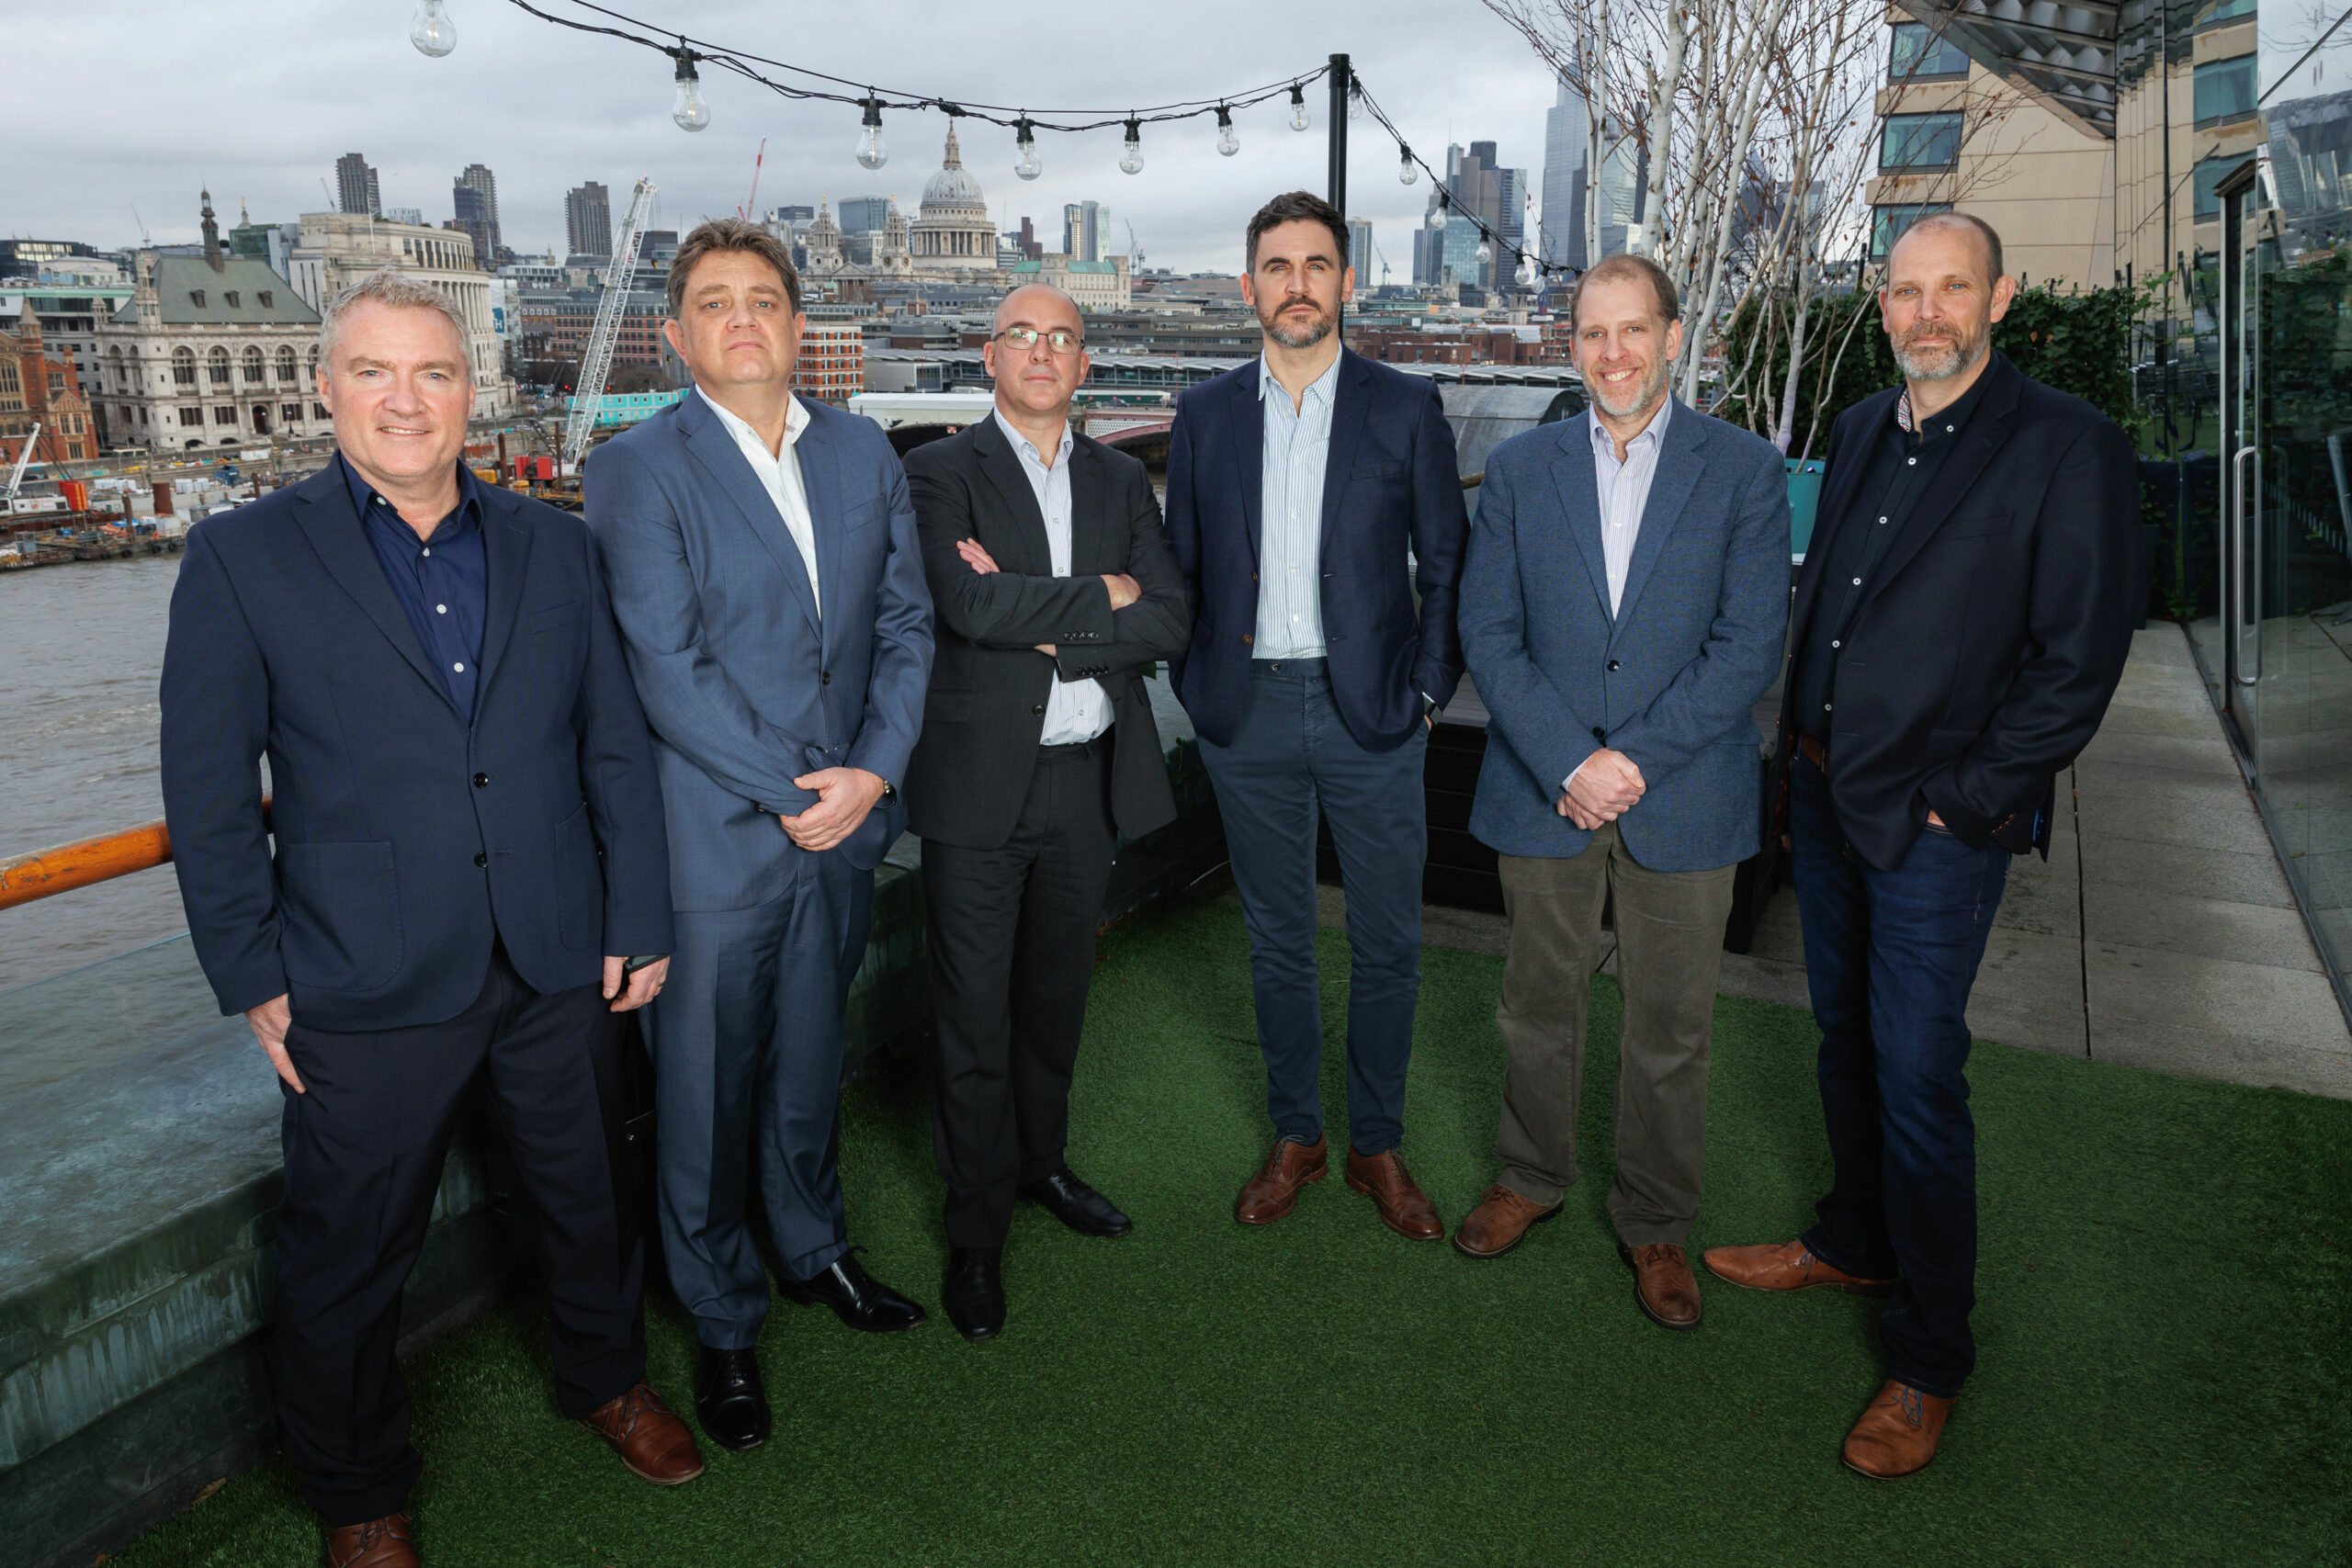 Qubix and Version 1 team members pictured on a balcony overlooking London city 